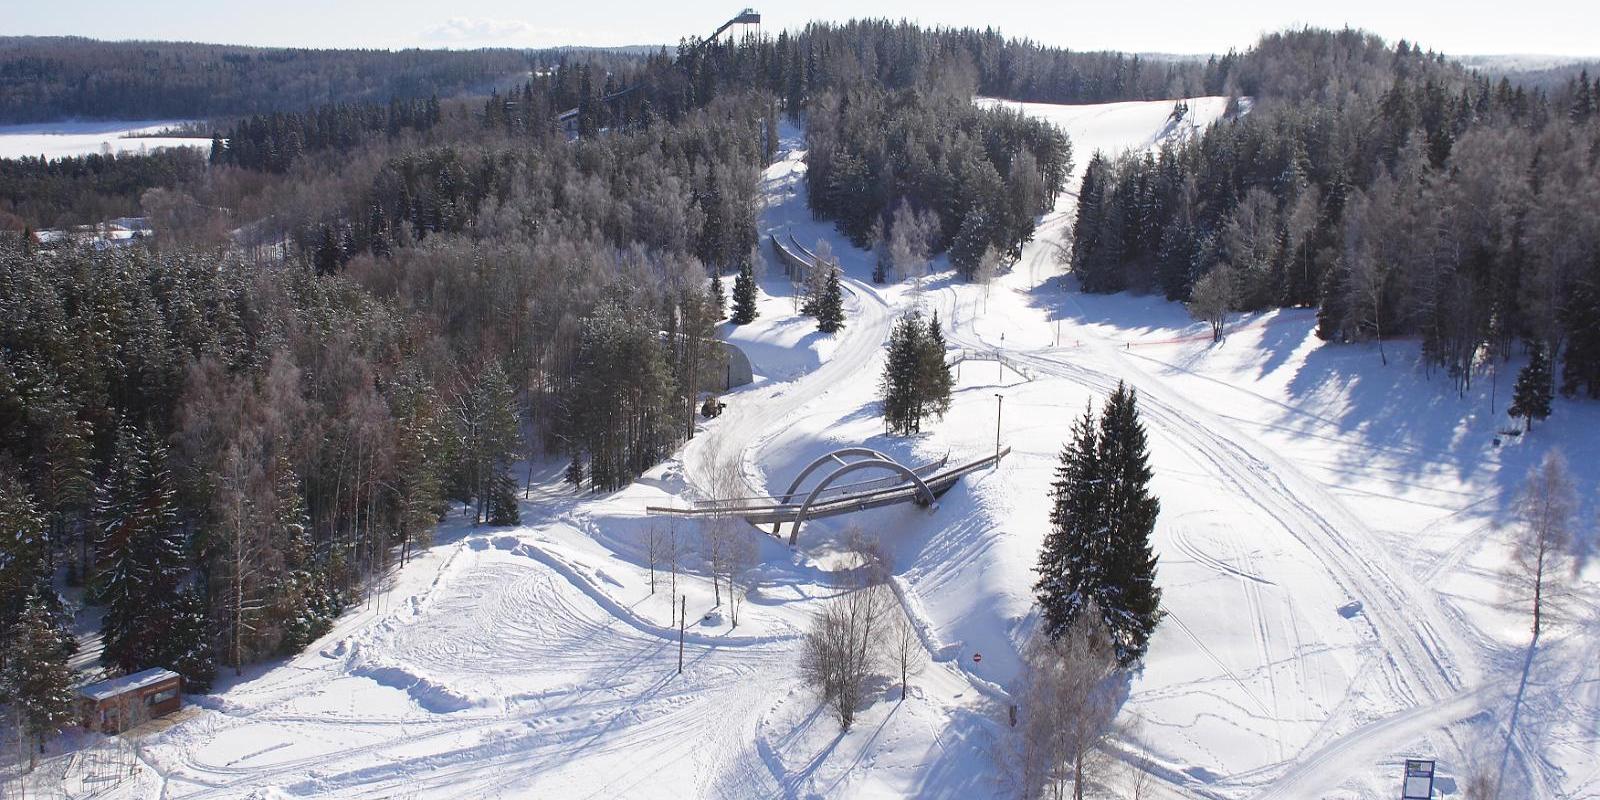 The 5 km ski track of Tehvandi Sports Centre is covered with artificial snow and invites you to ski classic style or freestyle. The relief of the trac